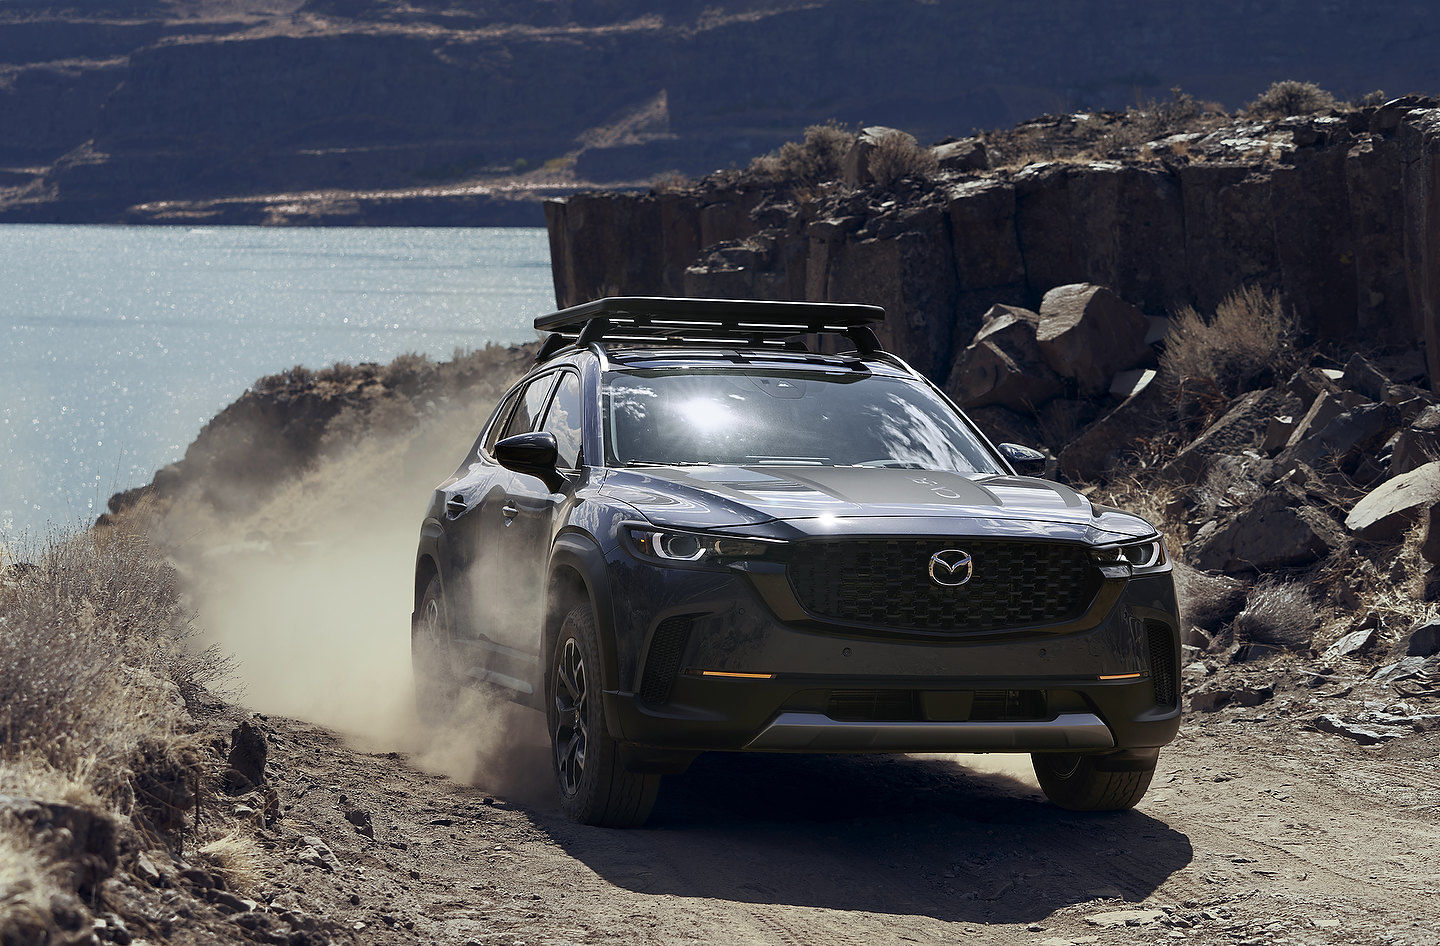 This is the all-new 2023 Mazda CX-50